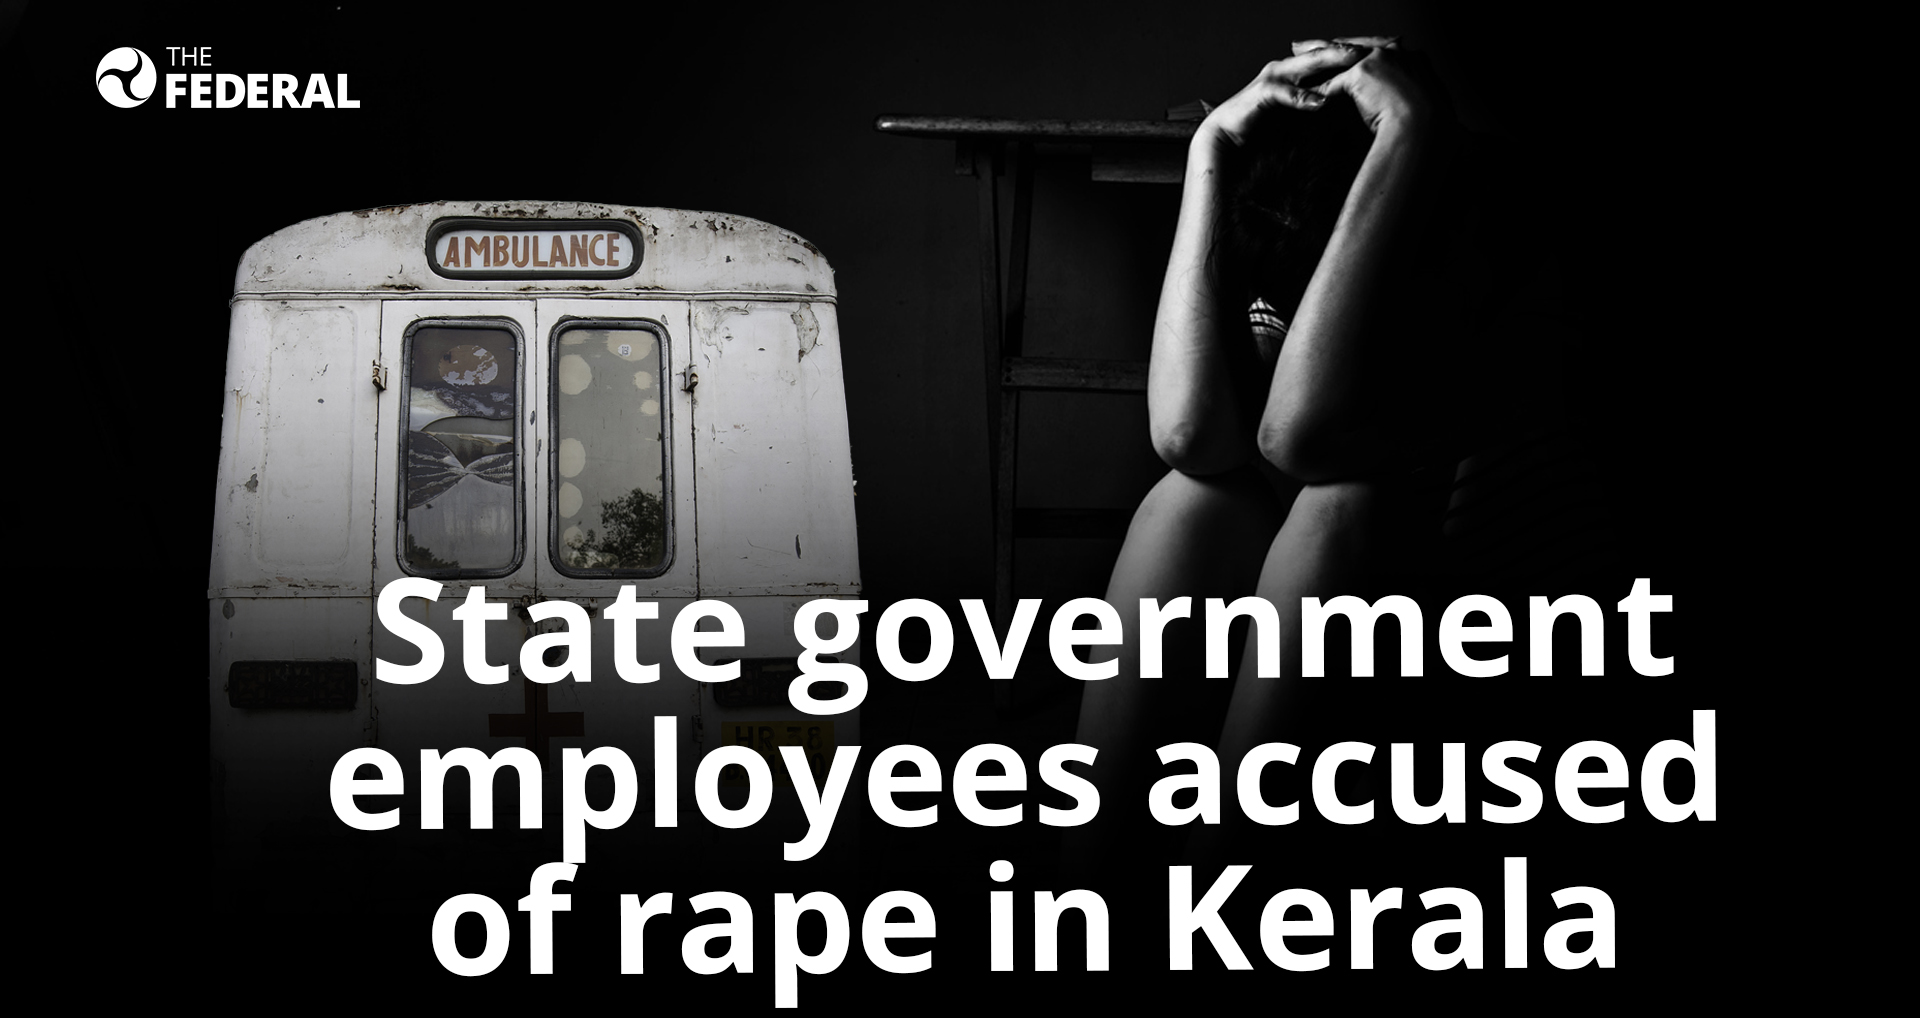 Two instances of COVID related rape in Kerala triggers public angst